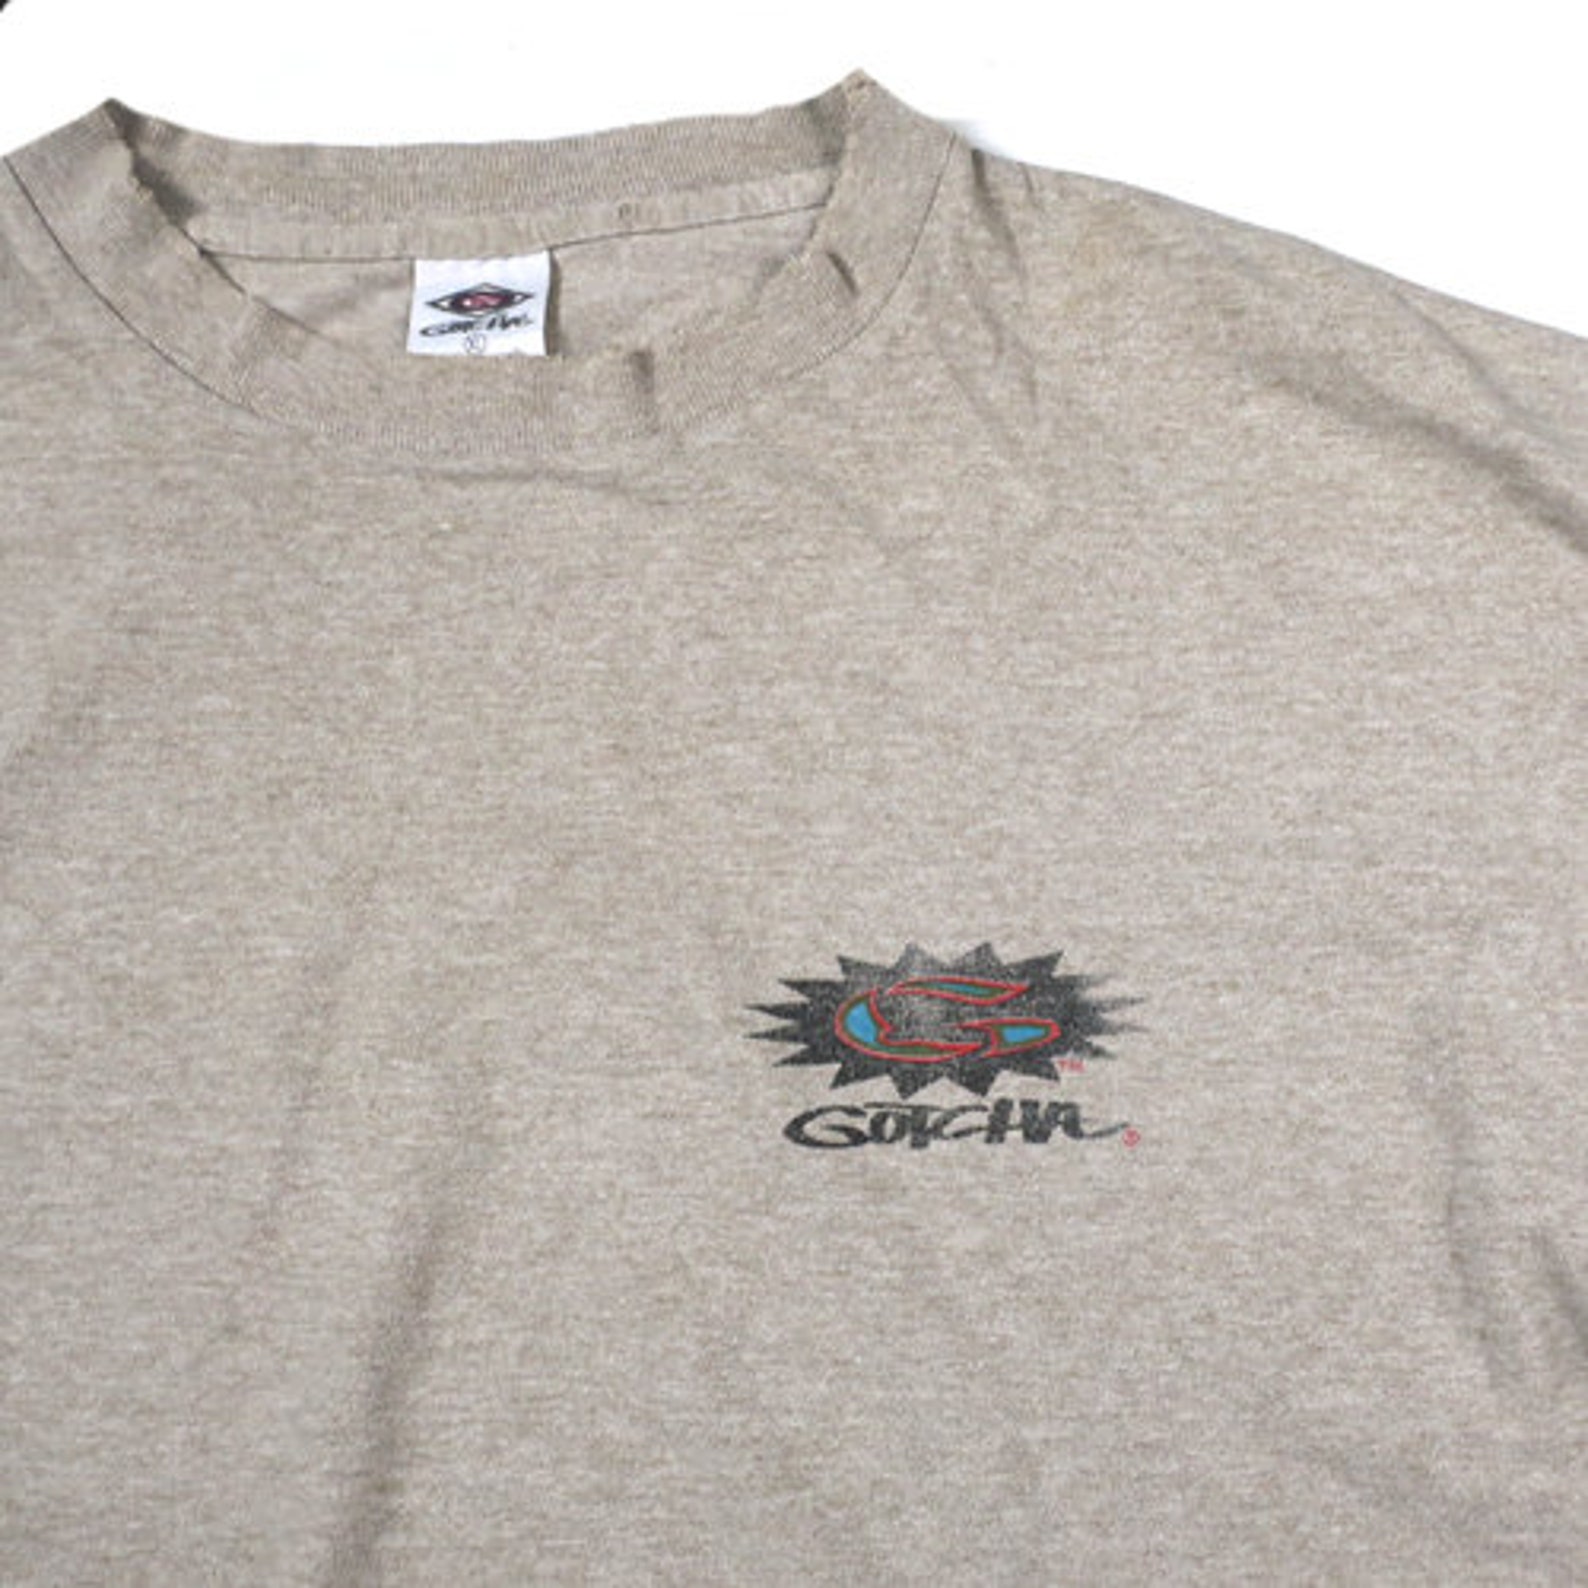 Vintage Gotcha 90s T-shirt Made in USA Surf Surfing - Etsy